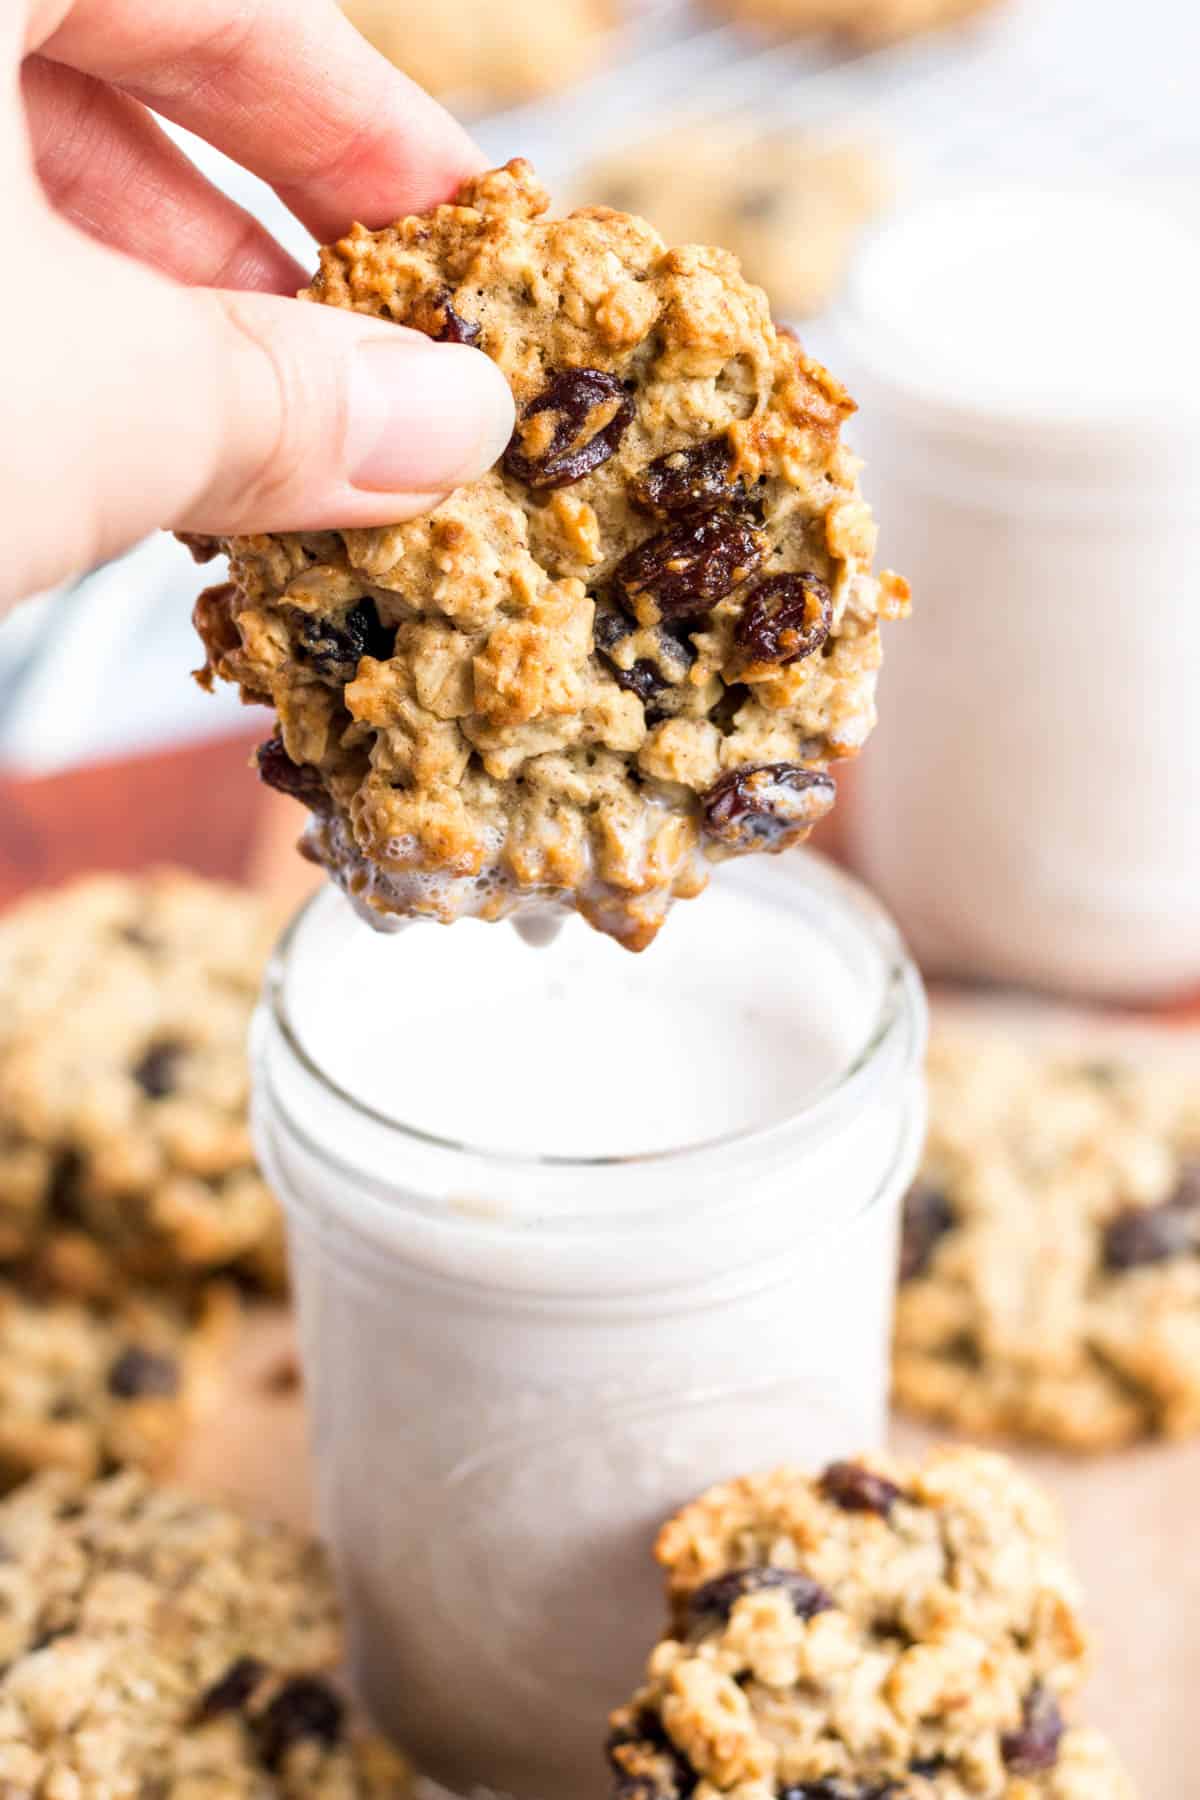 An oatmeal raisin cookie being dipped into a glass of milk.